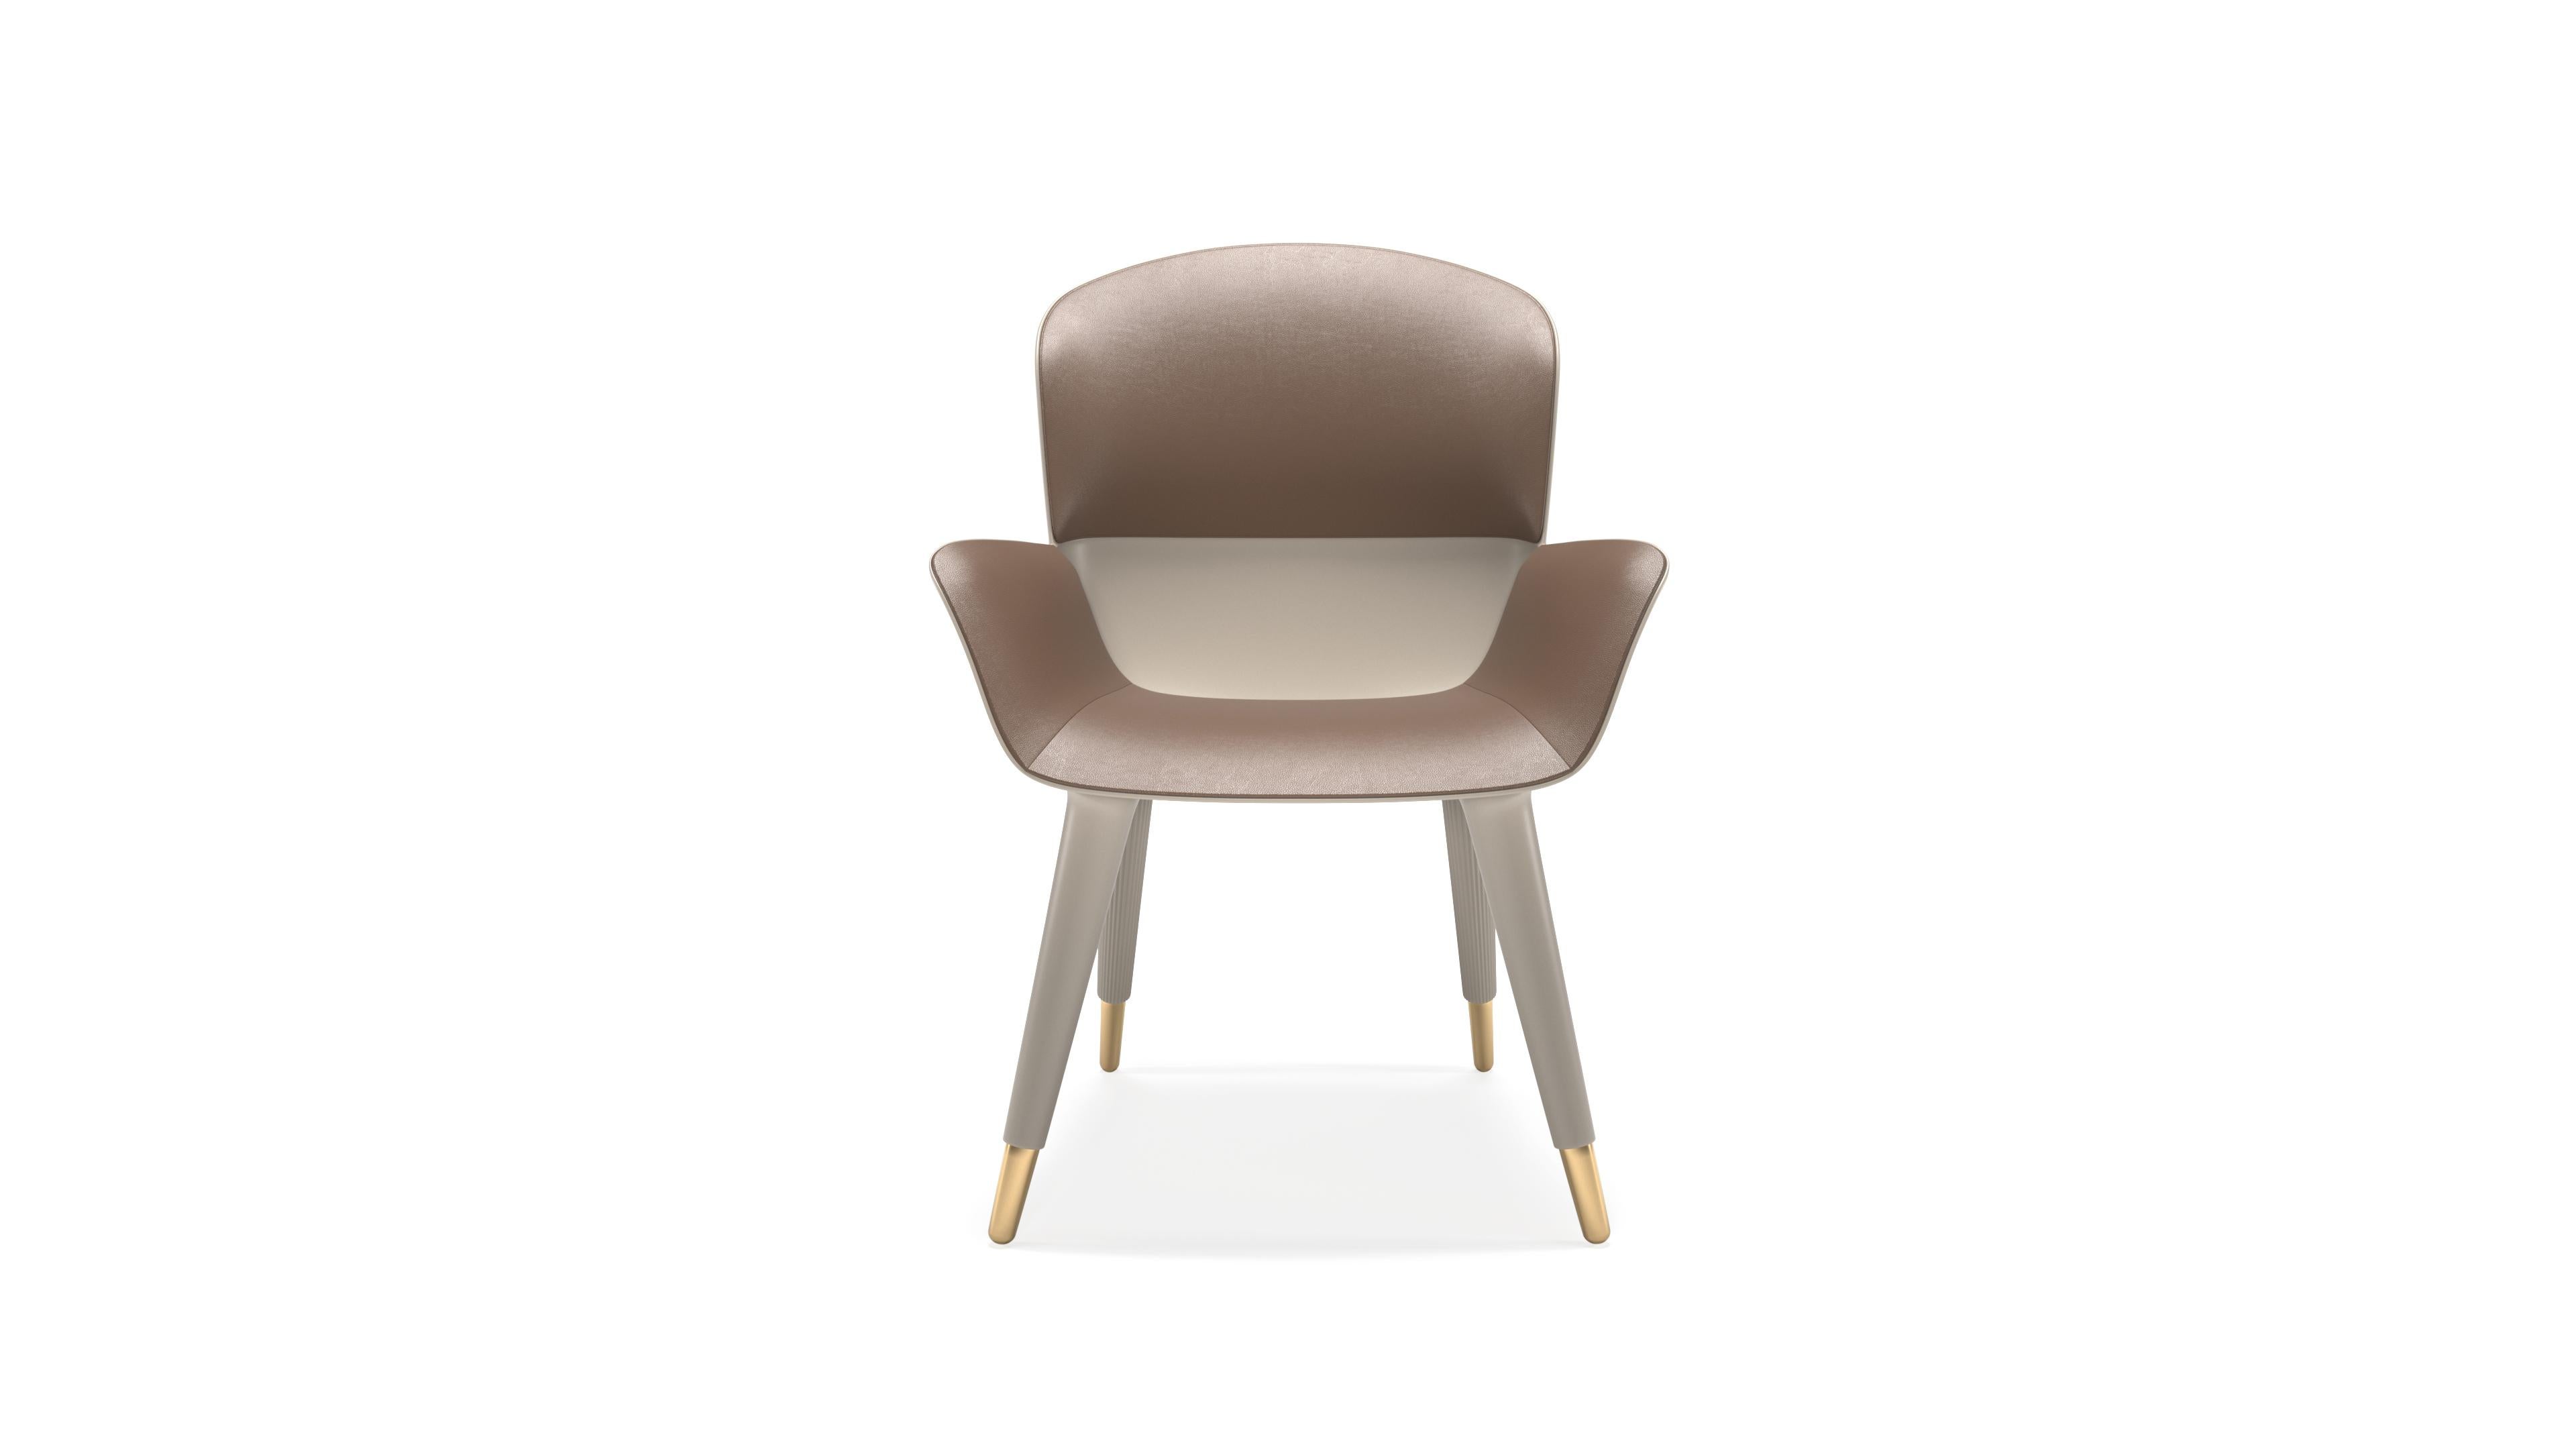 Eleanor Dining Chair 

The Eleanor dining armchair is a piece whose starting point is comfort and functionality. Its simple design, feminine curves, and undulating texture highlight and enrich its key points - legs, backrest and seat. The final